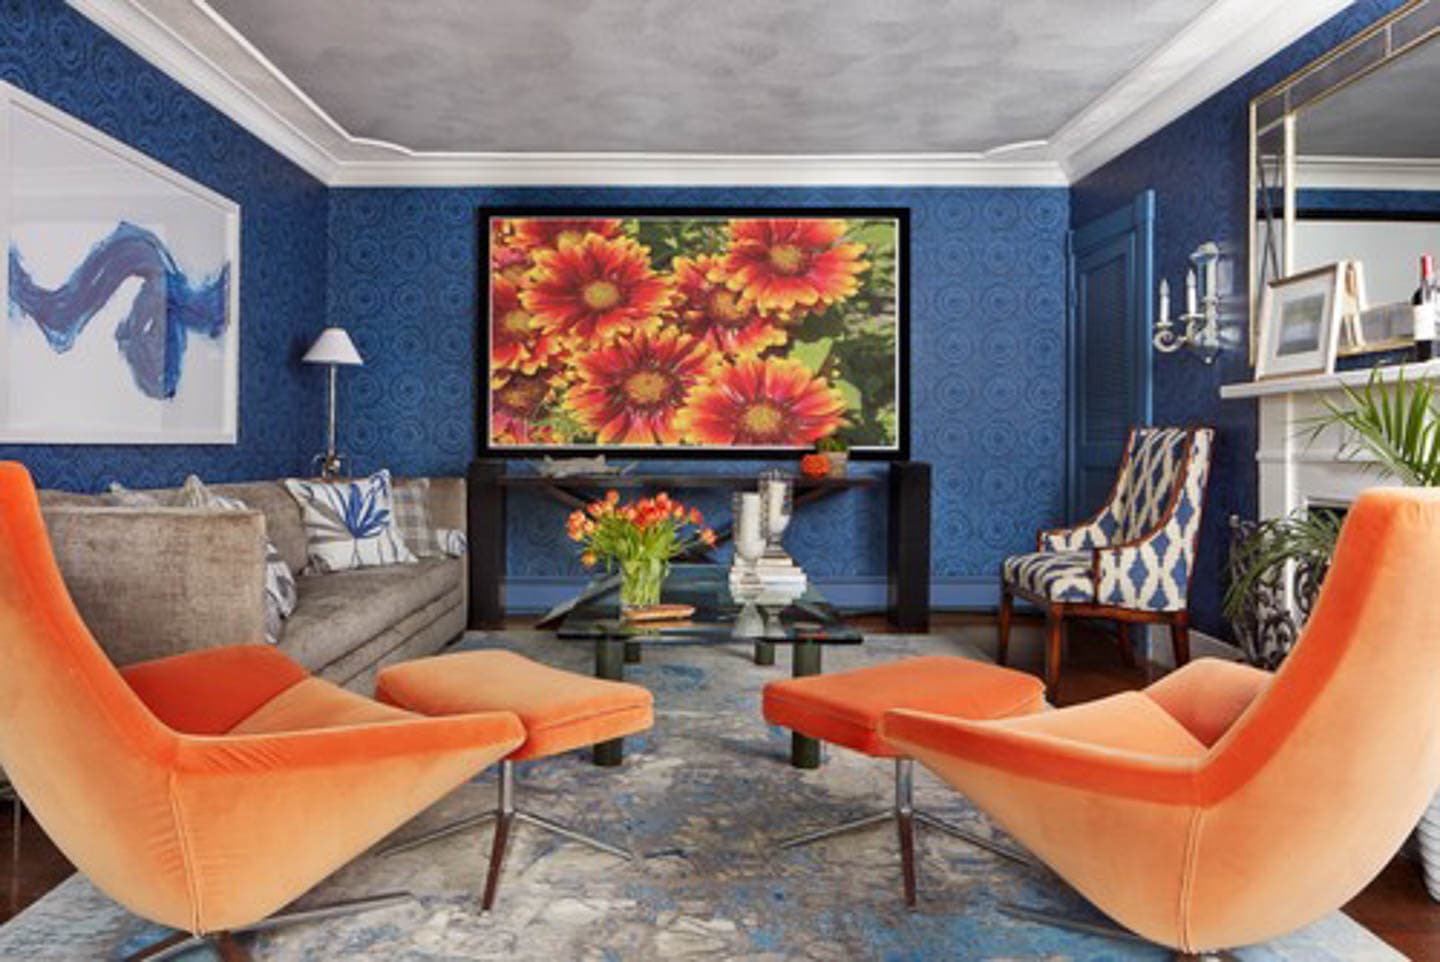 Blue living room with gray sofa, orange chairs and a large silver area rug